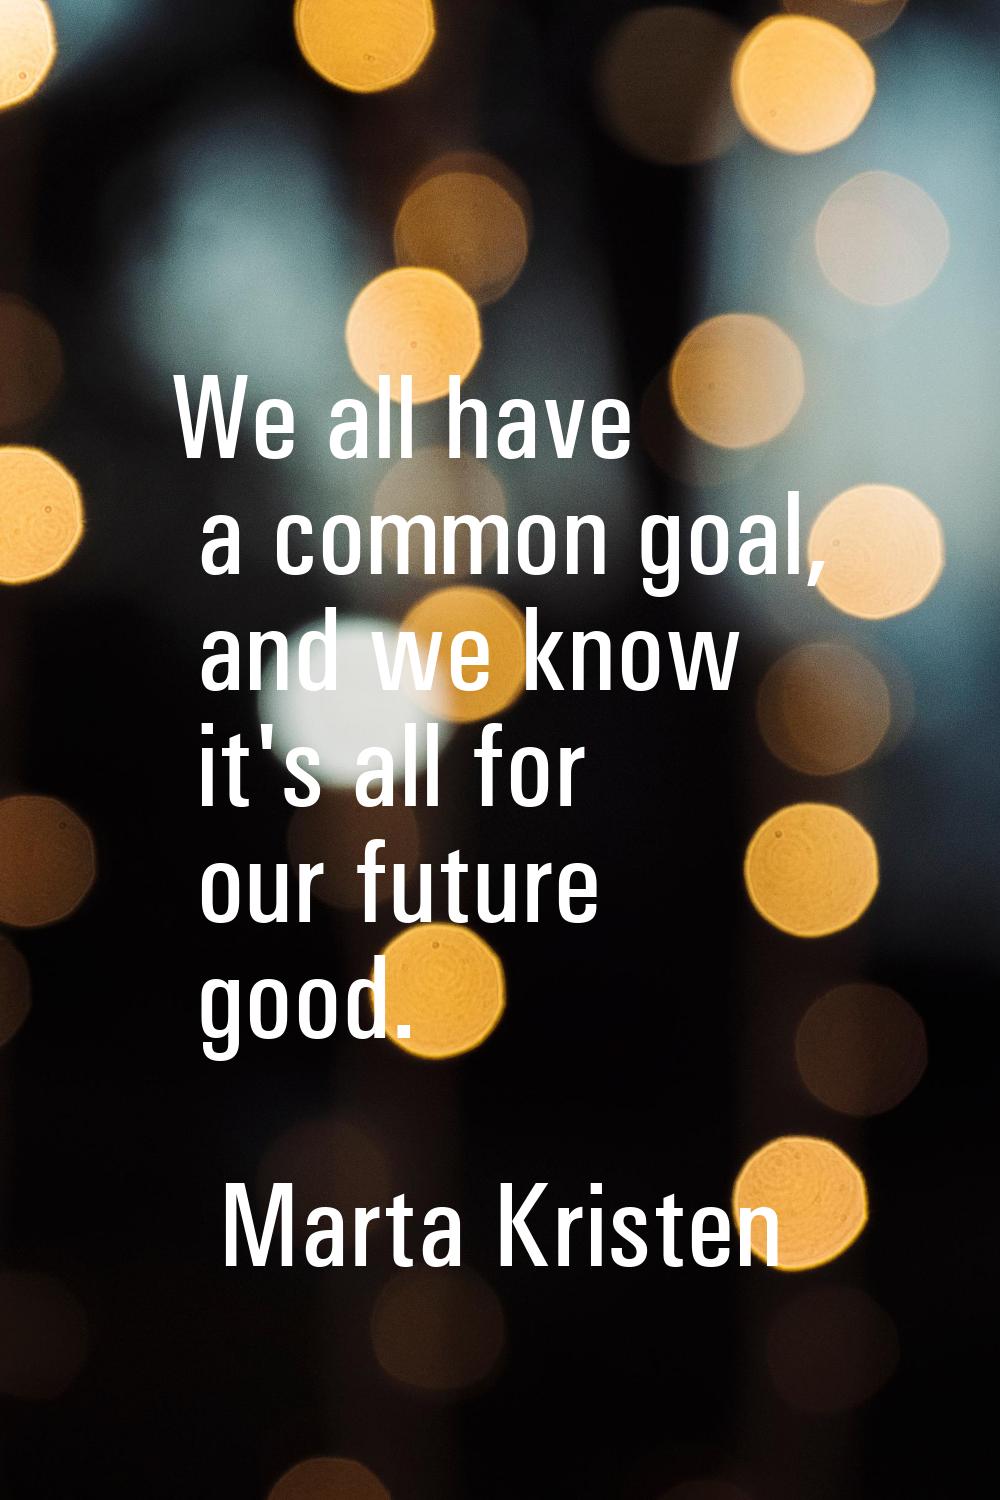 We all have a common goal, and we know it's all for our future good.